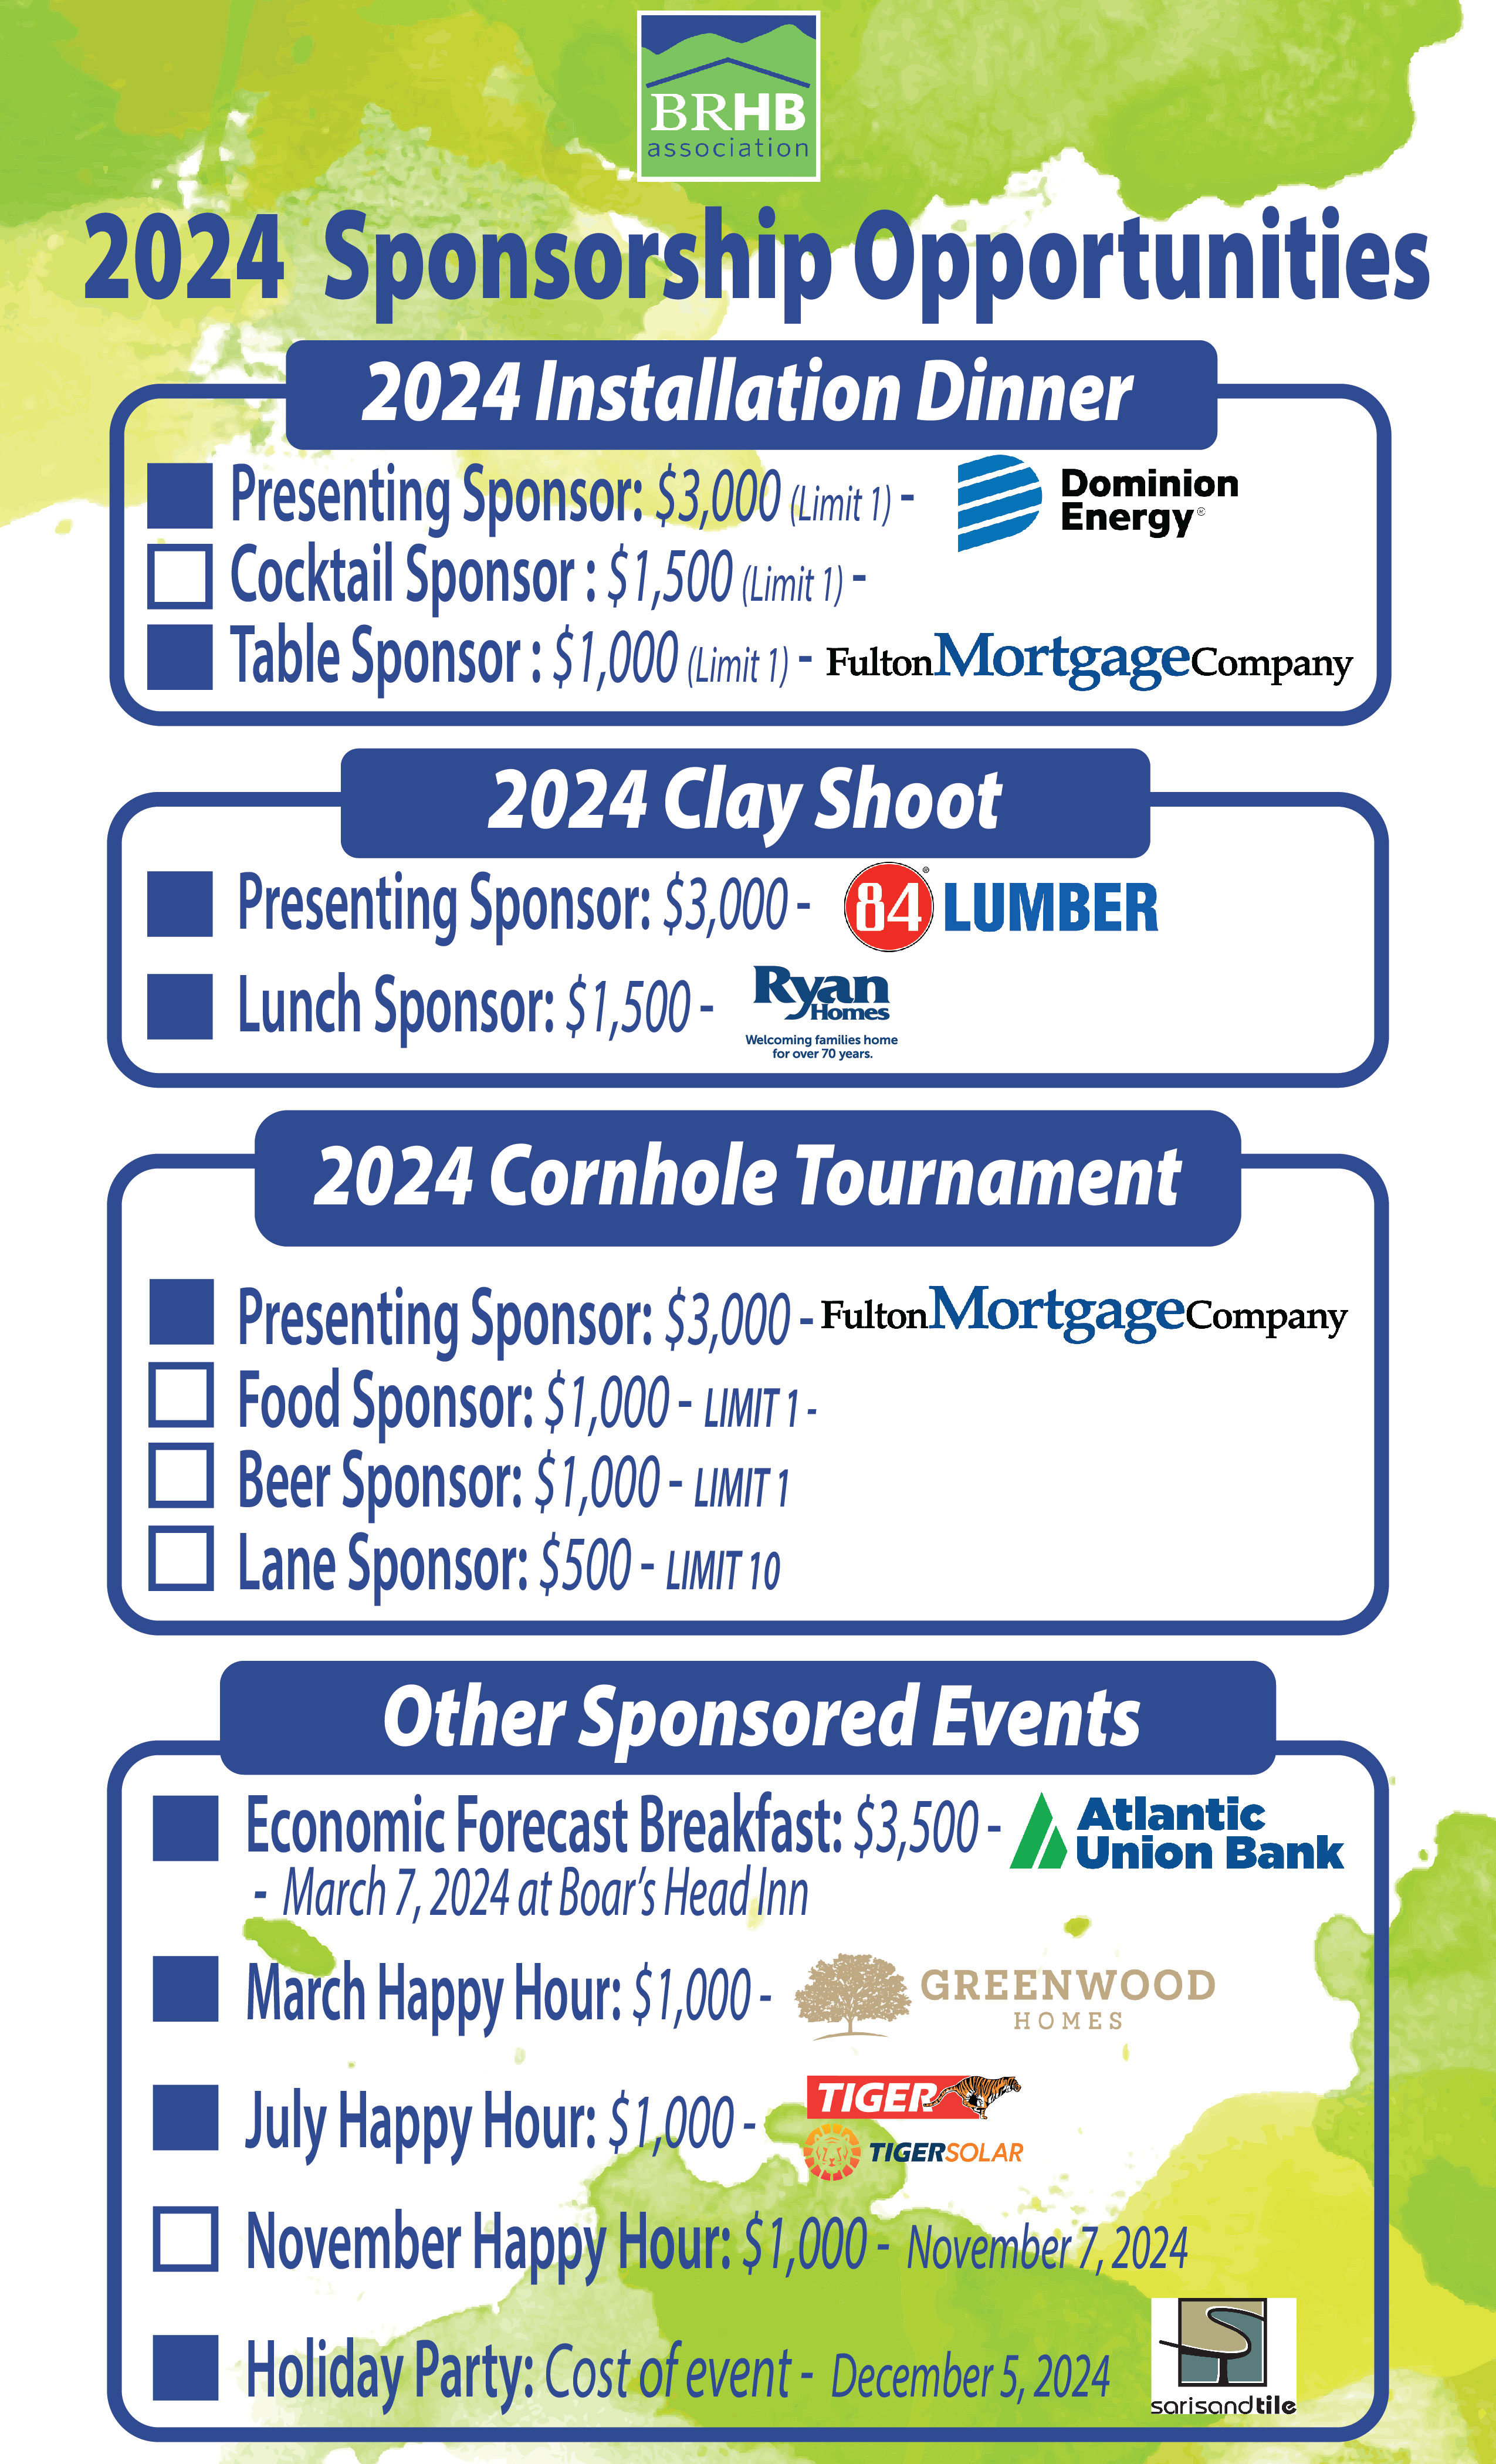 Sponsorship Opportunities 2024 4.23.24 updated-03